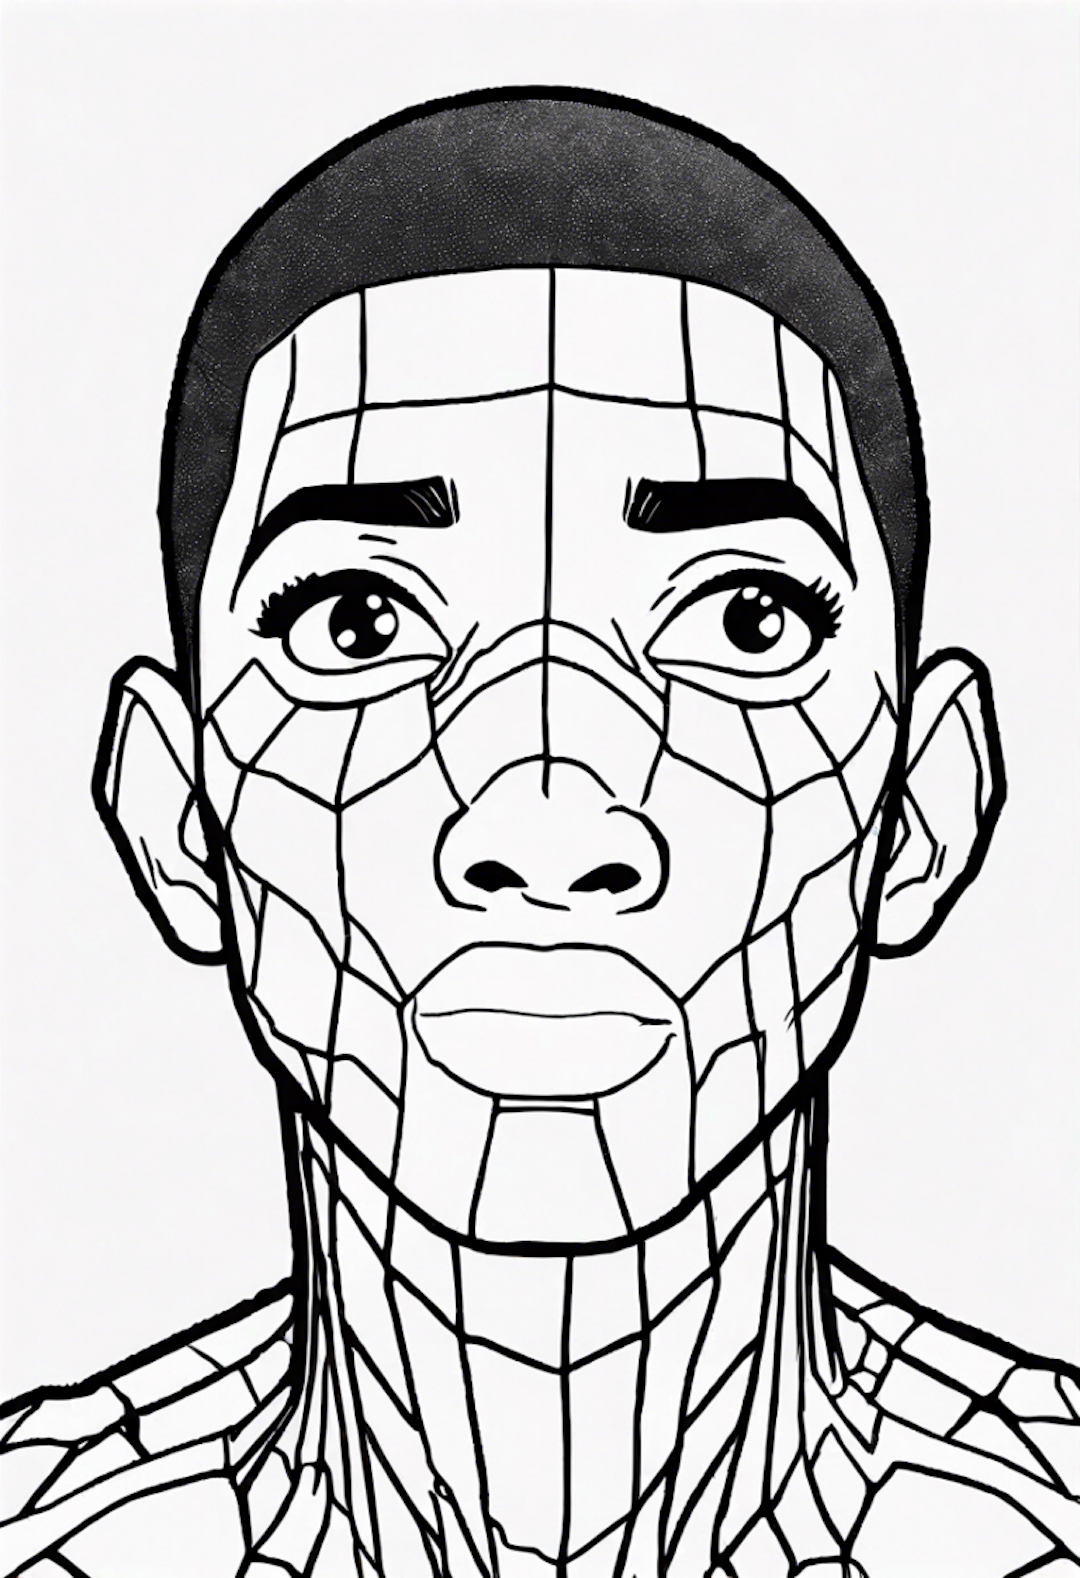 Geometric Face Art Coloring Page coloring pages